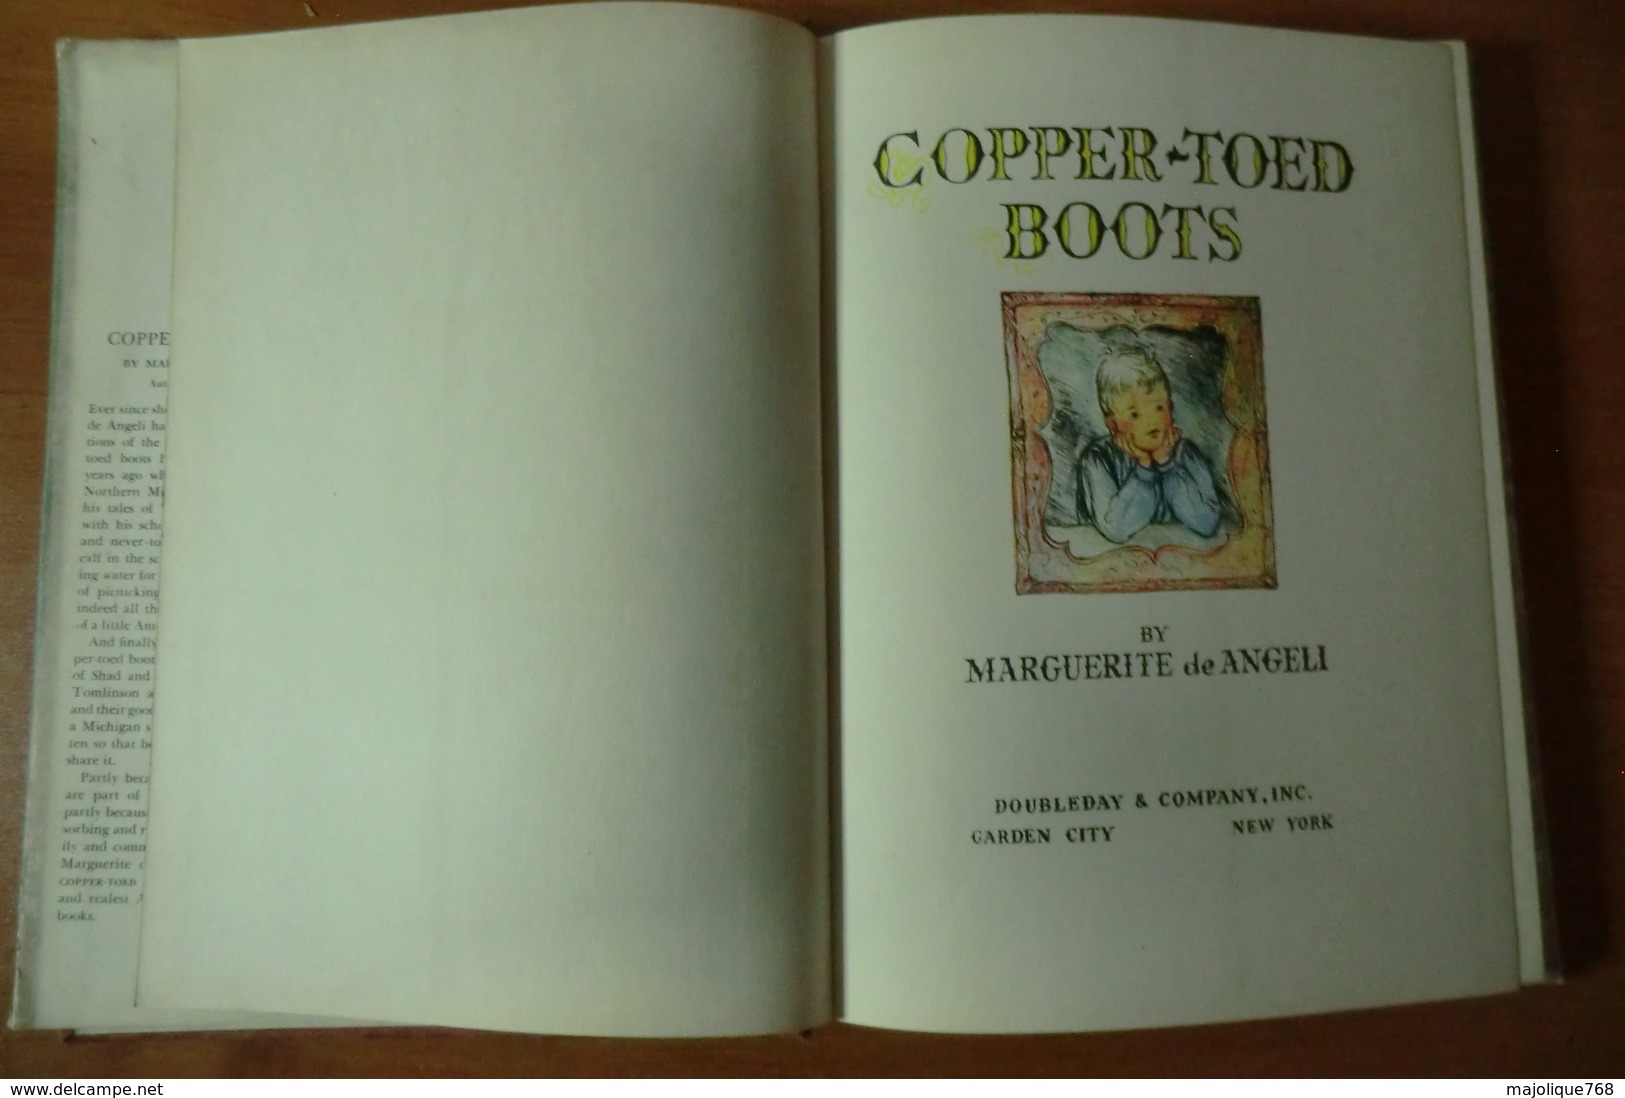 Copper-Toed Boots - Marguerite de Angeli - By The Author of Henner's Lydia - 1938 -avec sa jaquette